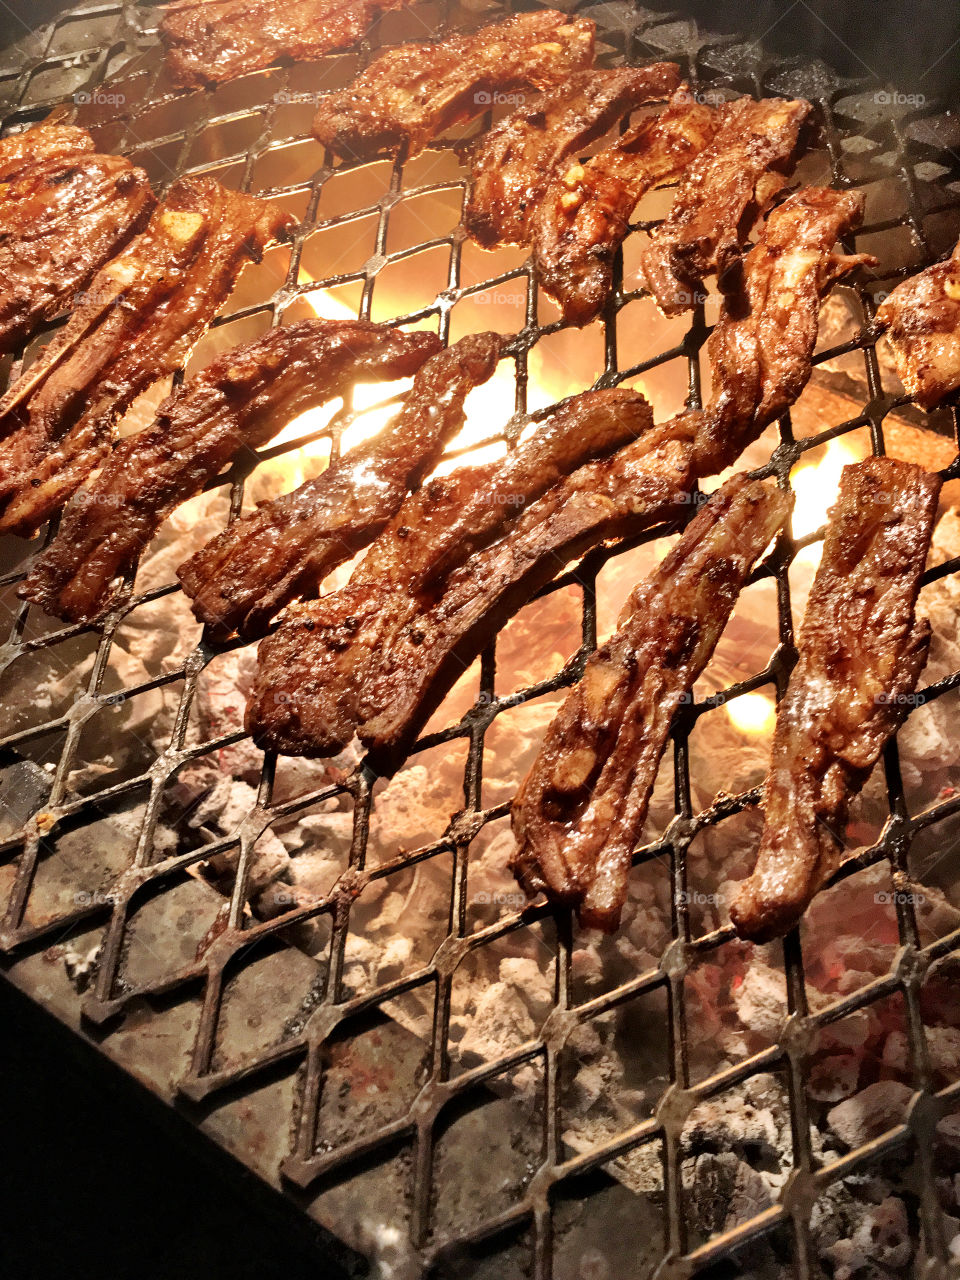 Directly above view of meat on barbecue grill